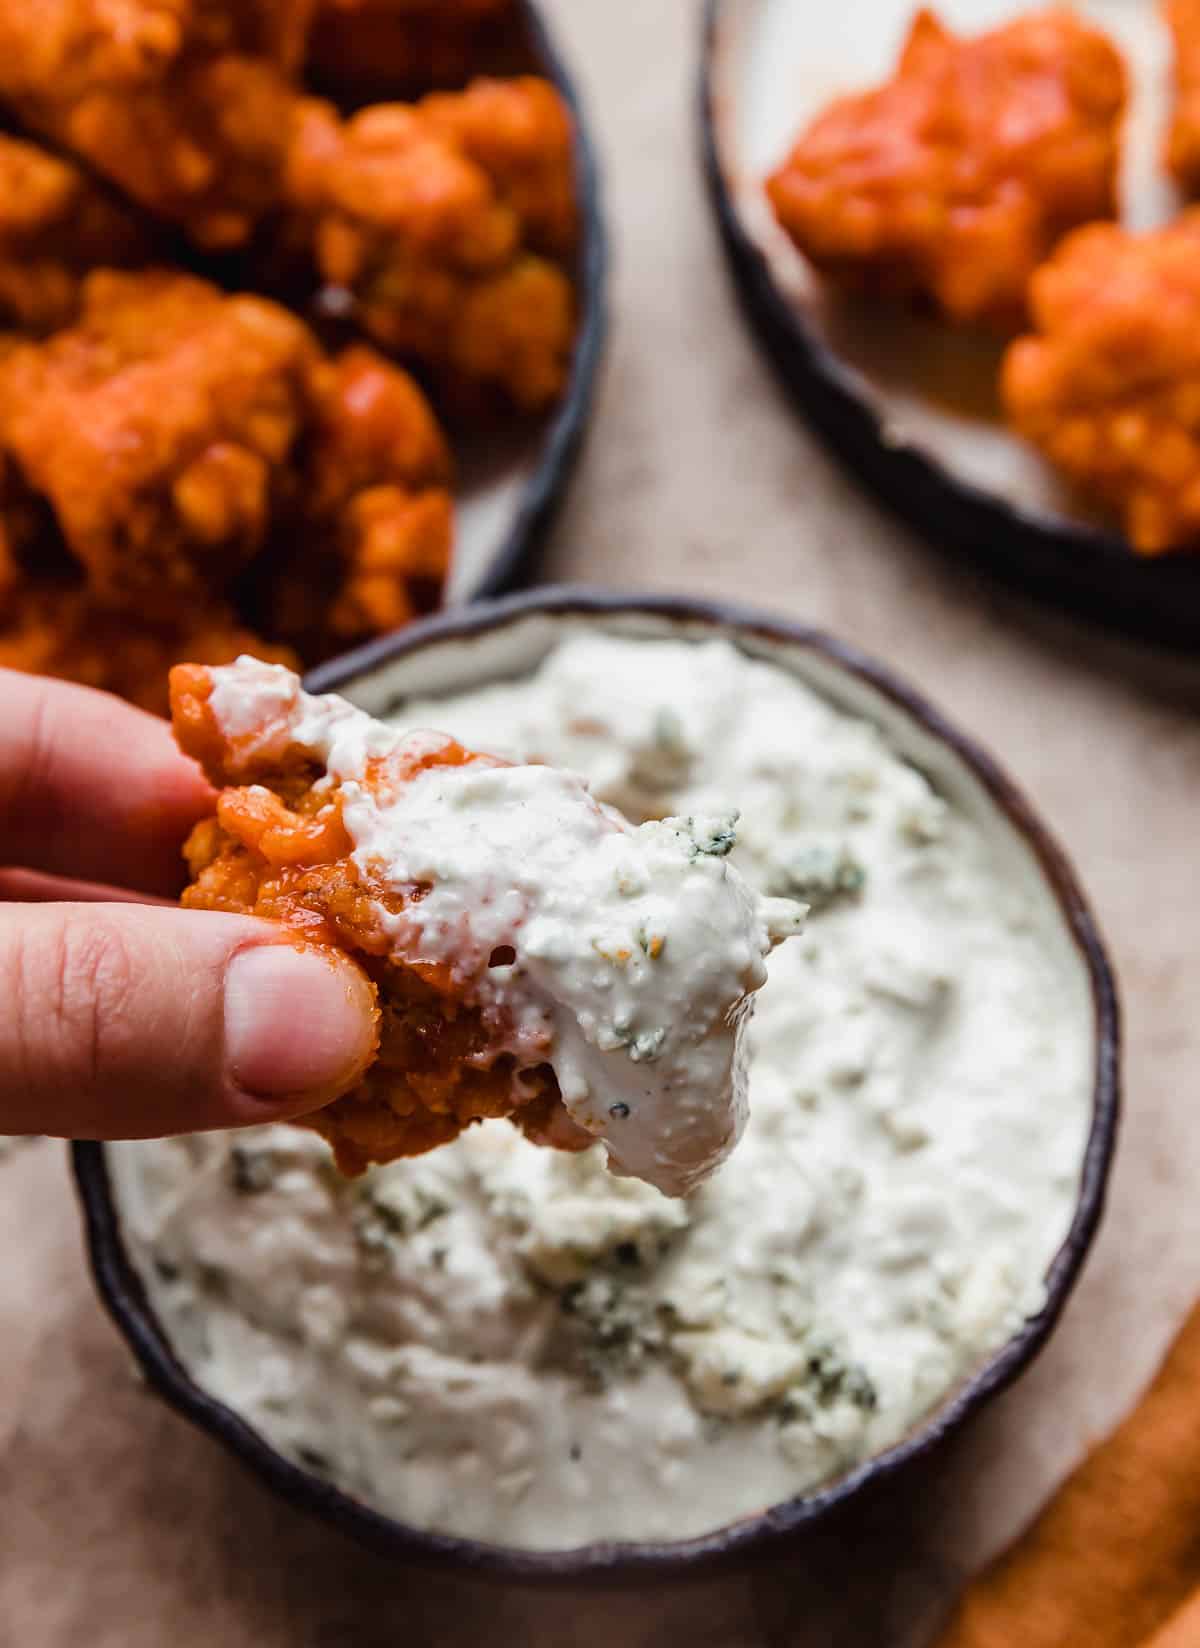 A Buffalo Chicken Bite dipped in blue cheese sauce.